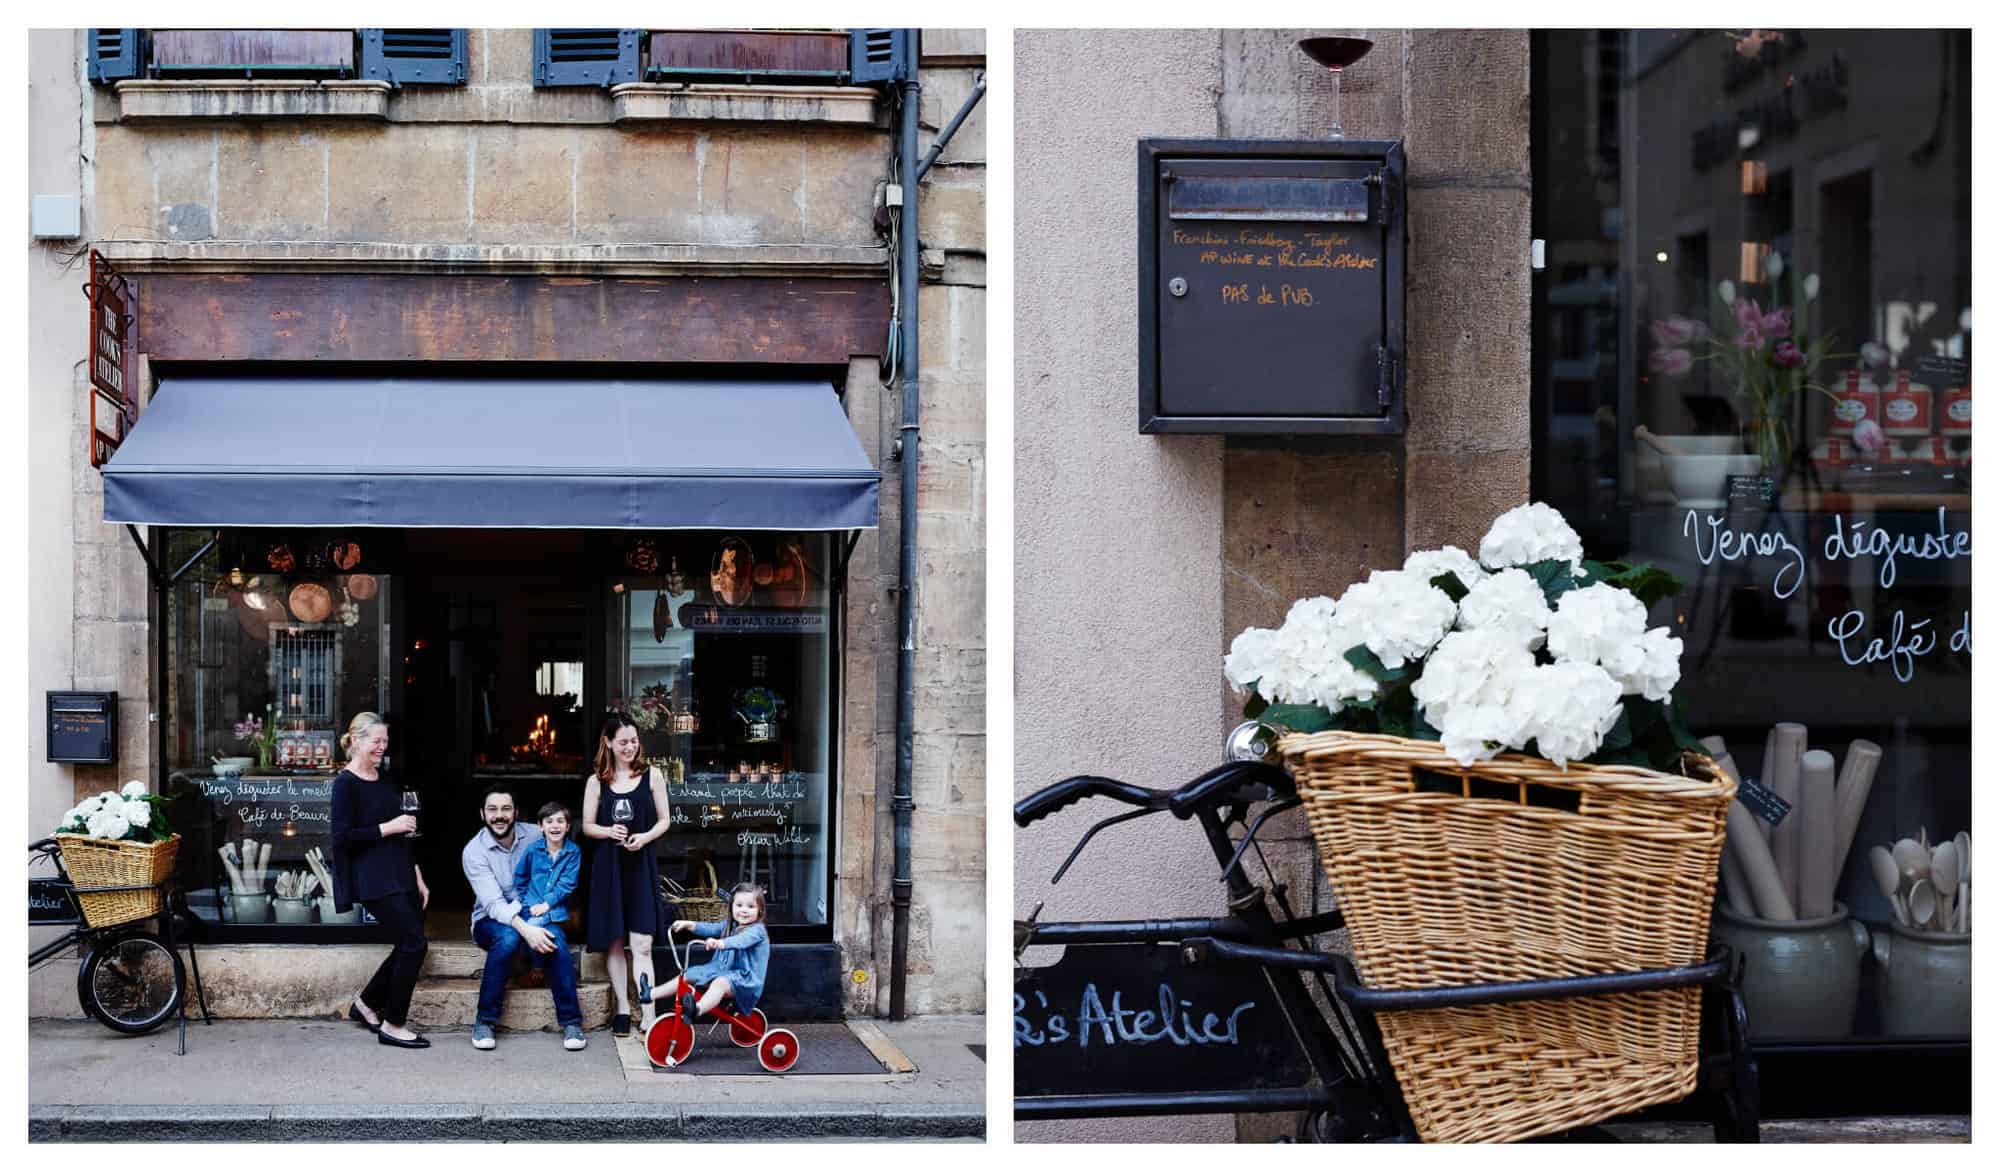 Left: The Cook's Atelier family are pictured standing outside of their boutique. Right: A bicycle with a flower-filled basket is pictured outside The Cook's Atelier shop.